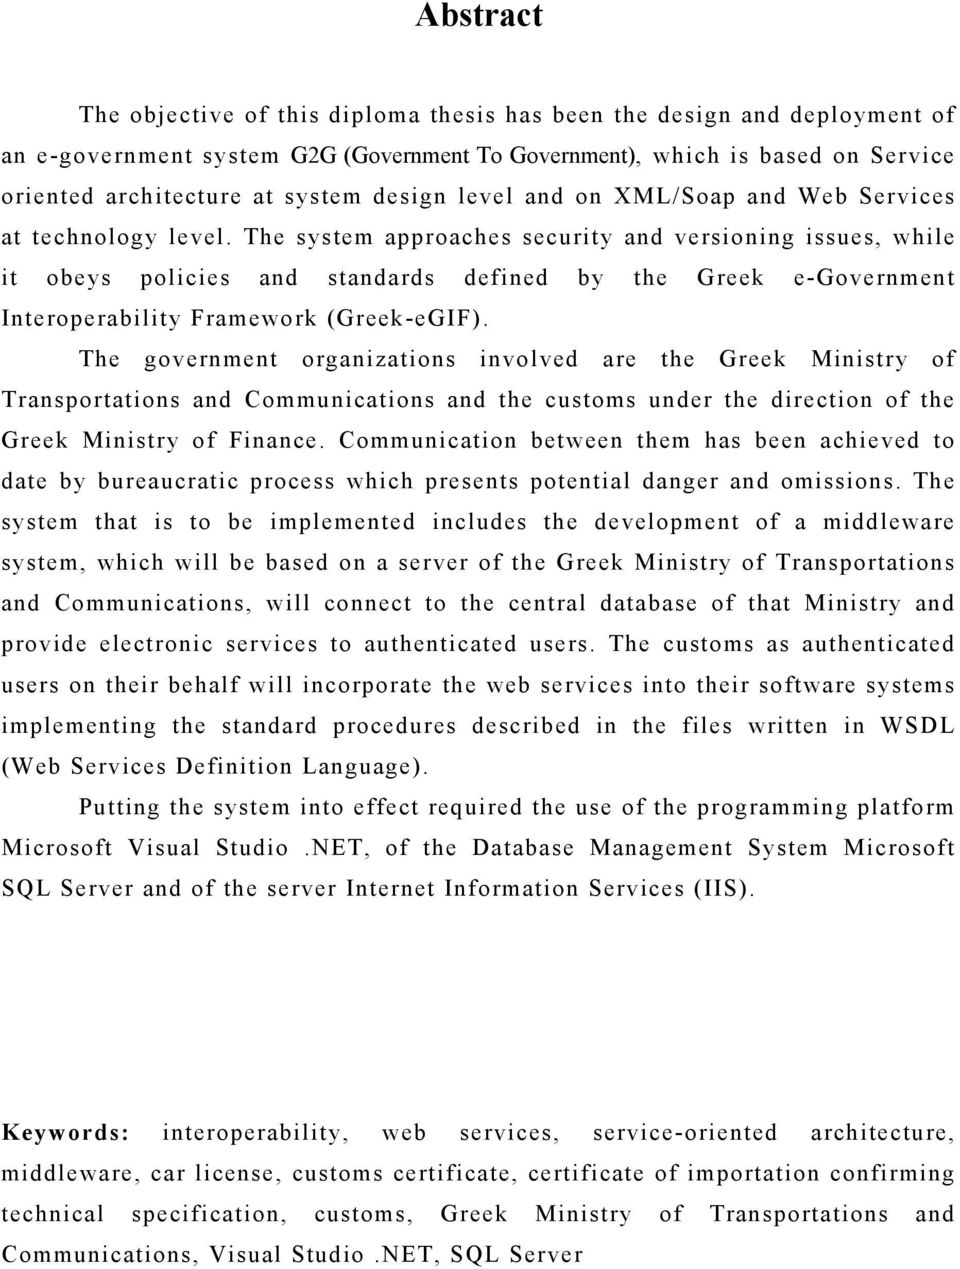 The system approaches security and versioning issues, while it obeys policies and standards defined by the Greek e-government Interoperability Framework (Greek-eGIF).